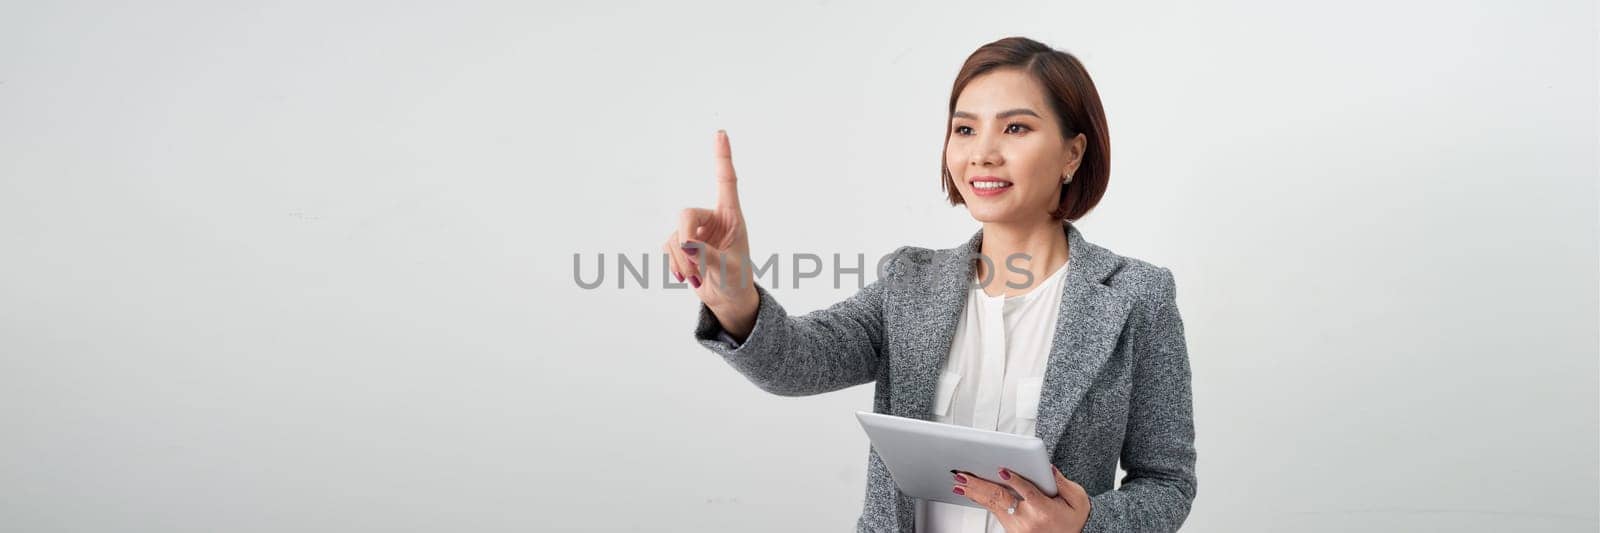 Banner of Isolated young business woman press something